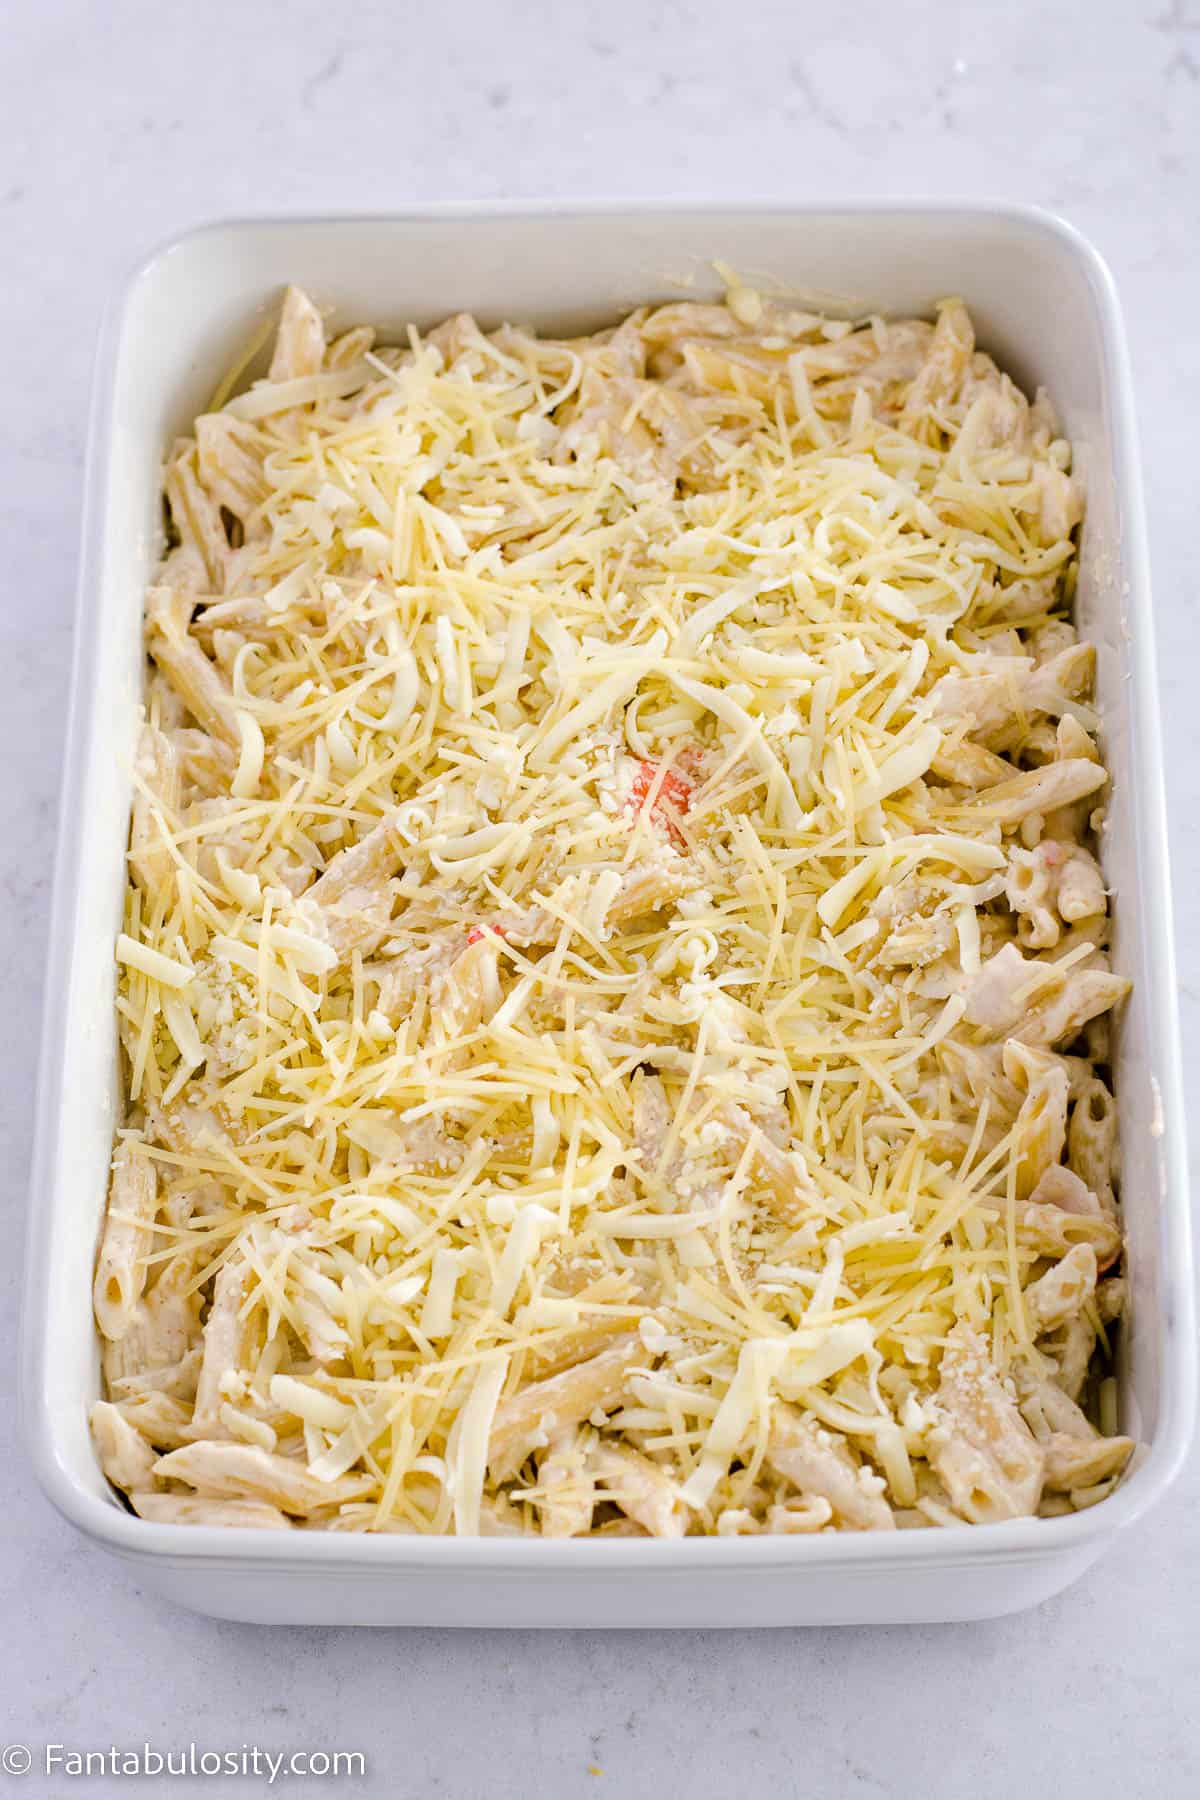 Mozzarella and shredded parmesan spread out on top of the crab casserole.